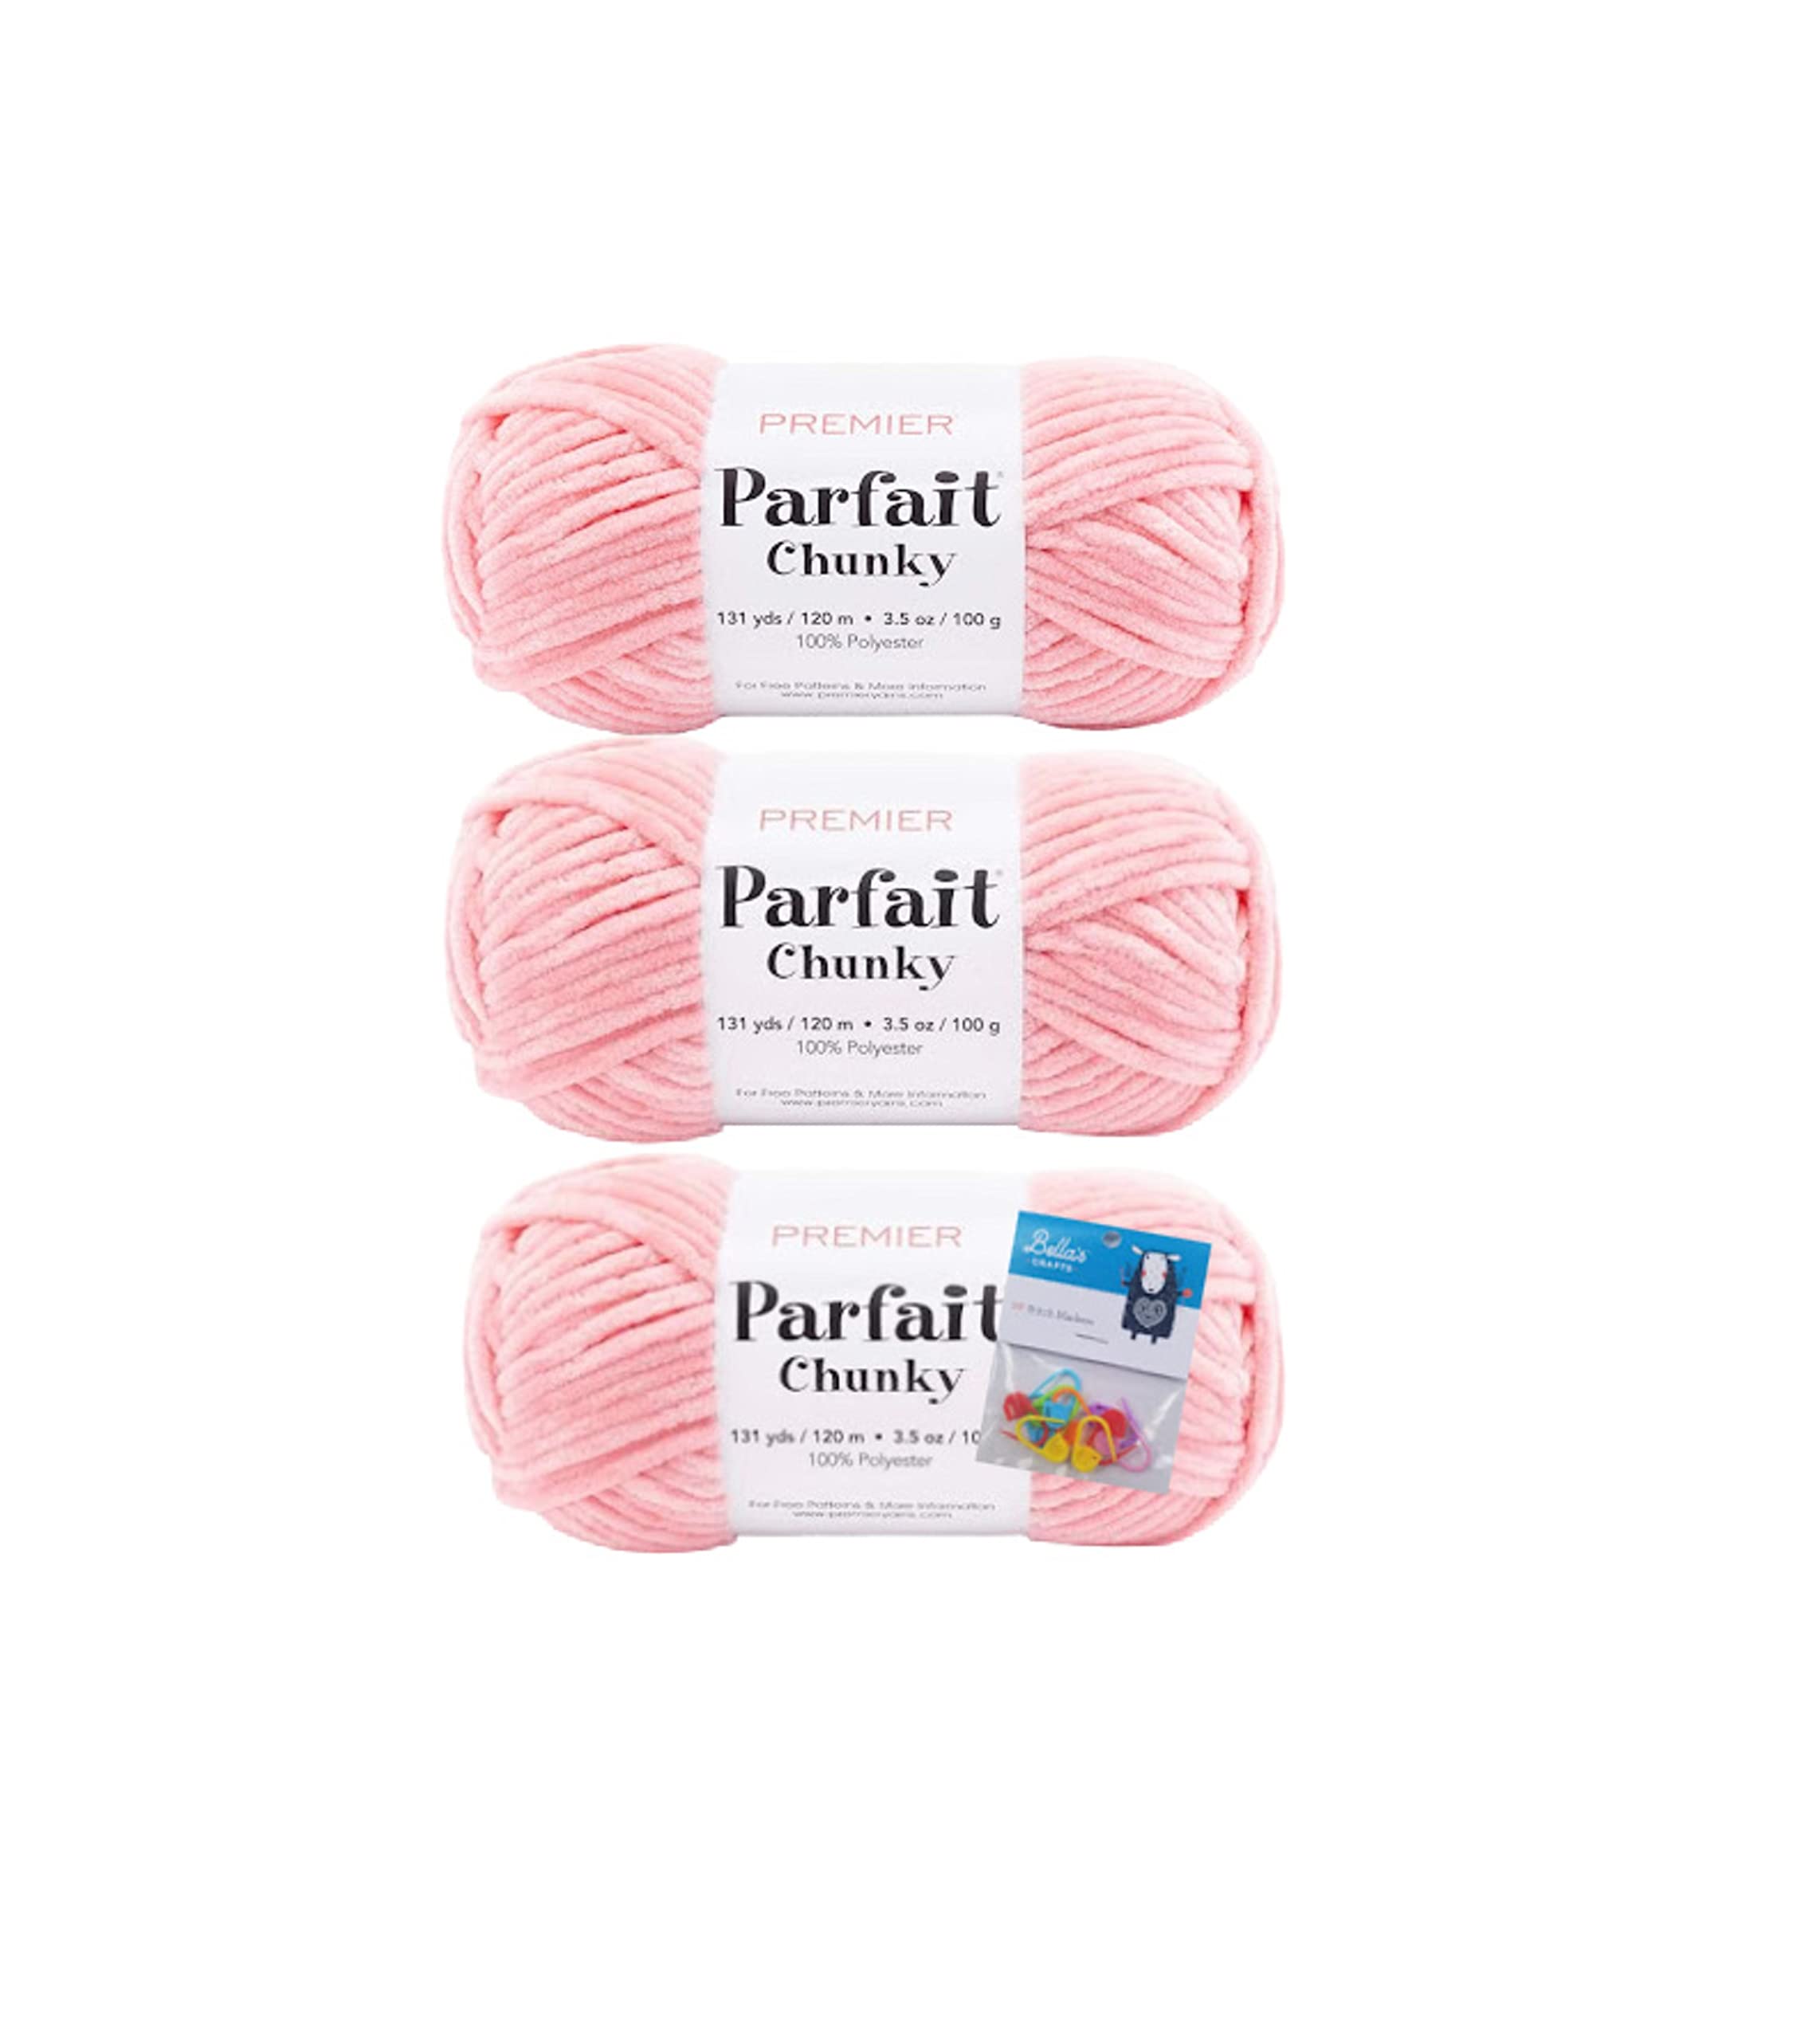 Premier Yarns Parfait Chunky - 3.5 Oz - 6 Super Bulky Weight - 3 Pack  Bundle with Bella's Crafts Stitch Markers (Pink Lemonade)